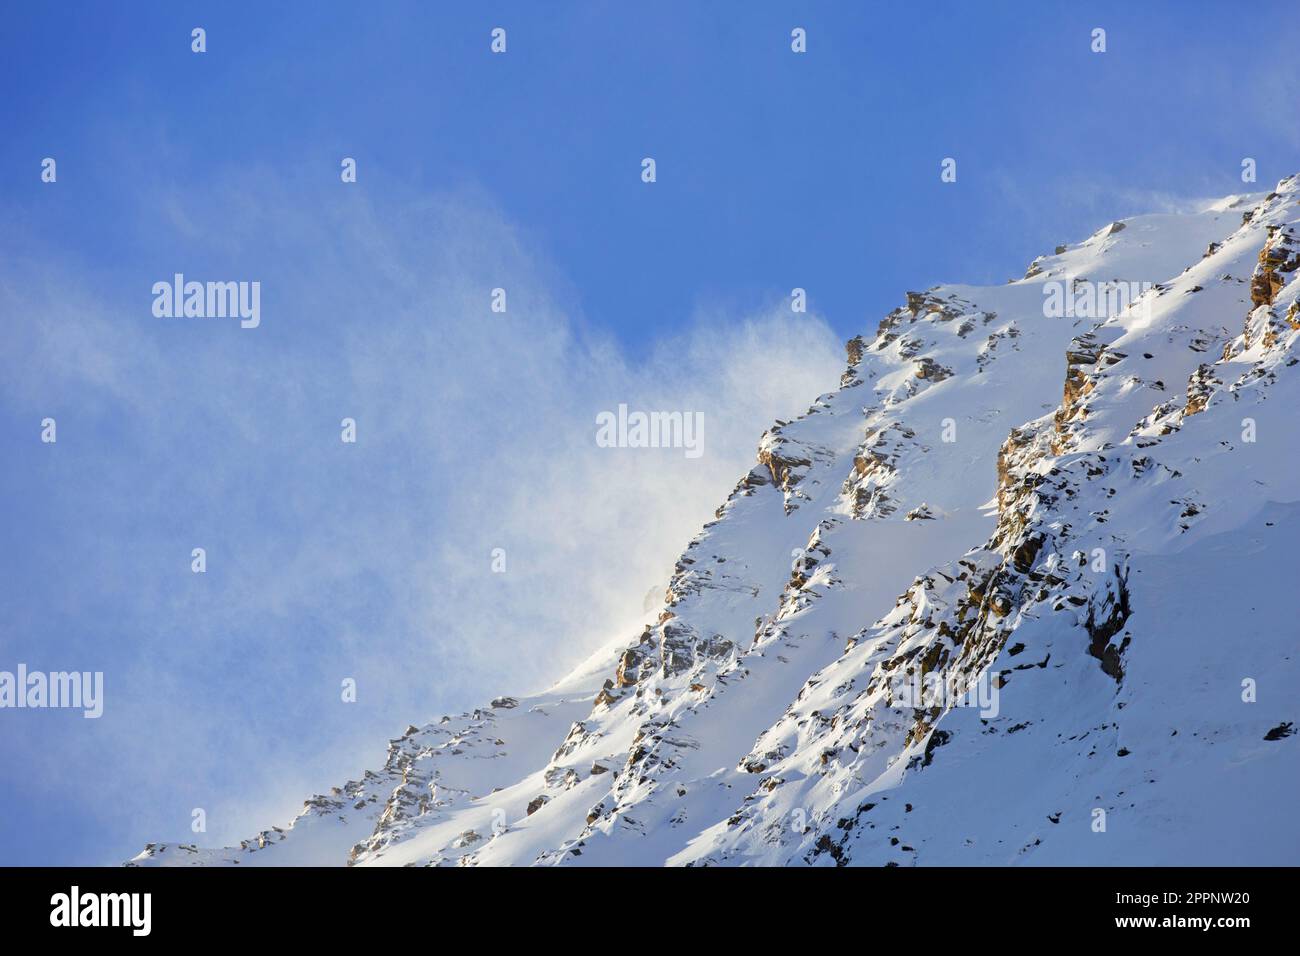 Snowstorm in the mountains in winter in the Gran Paradiso National Park, Aosta, Graian Alps, Italy Stock Photo